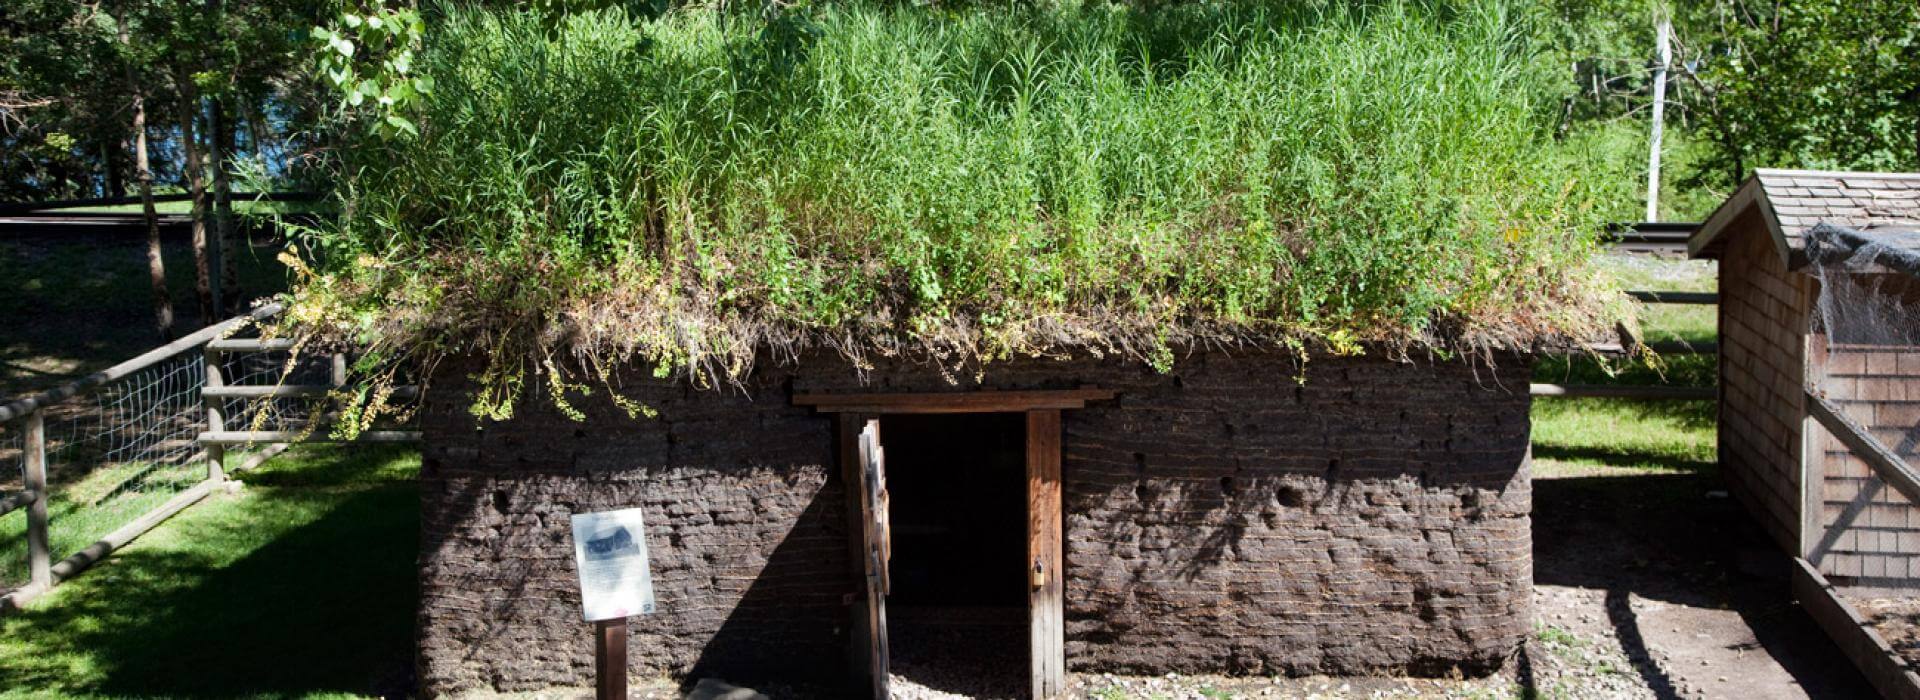 small dirt building with grass growing on roof 